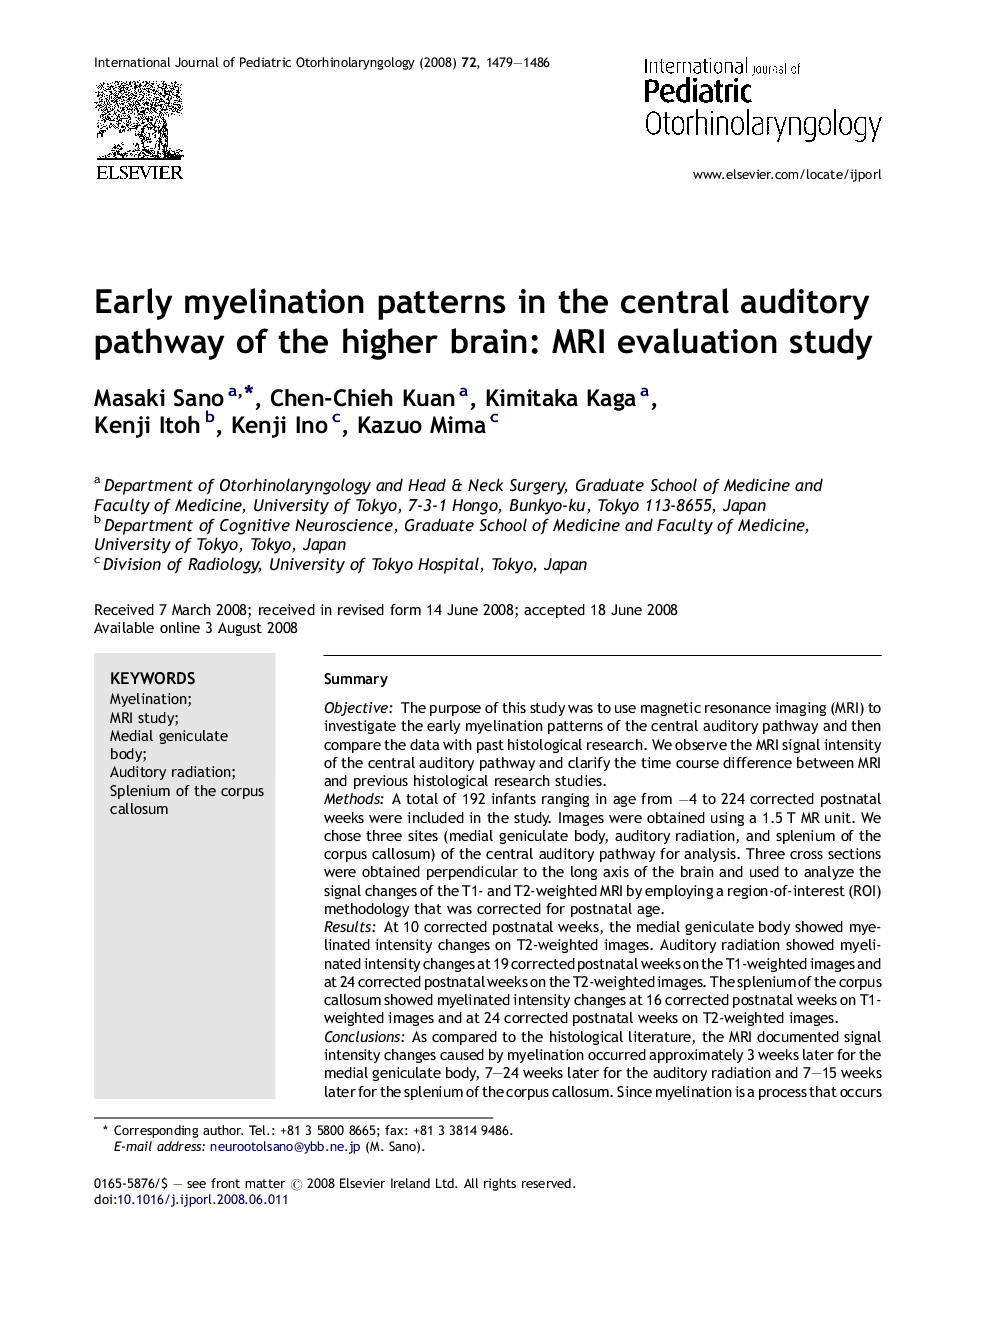 Early myelination patterns in the central auditory pathway of the higher brain: MRI evaluation study